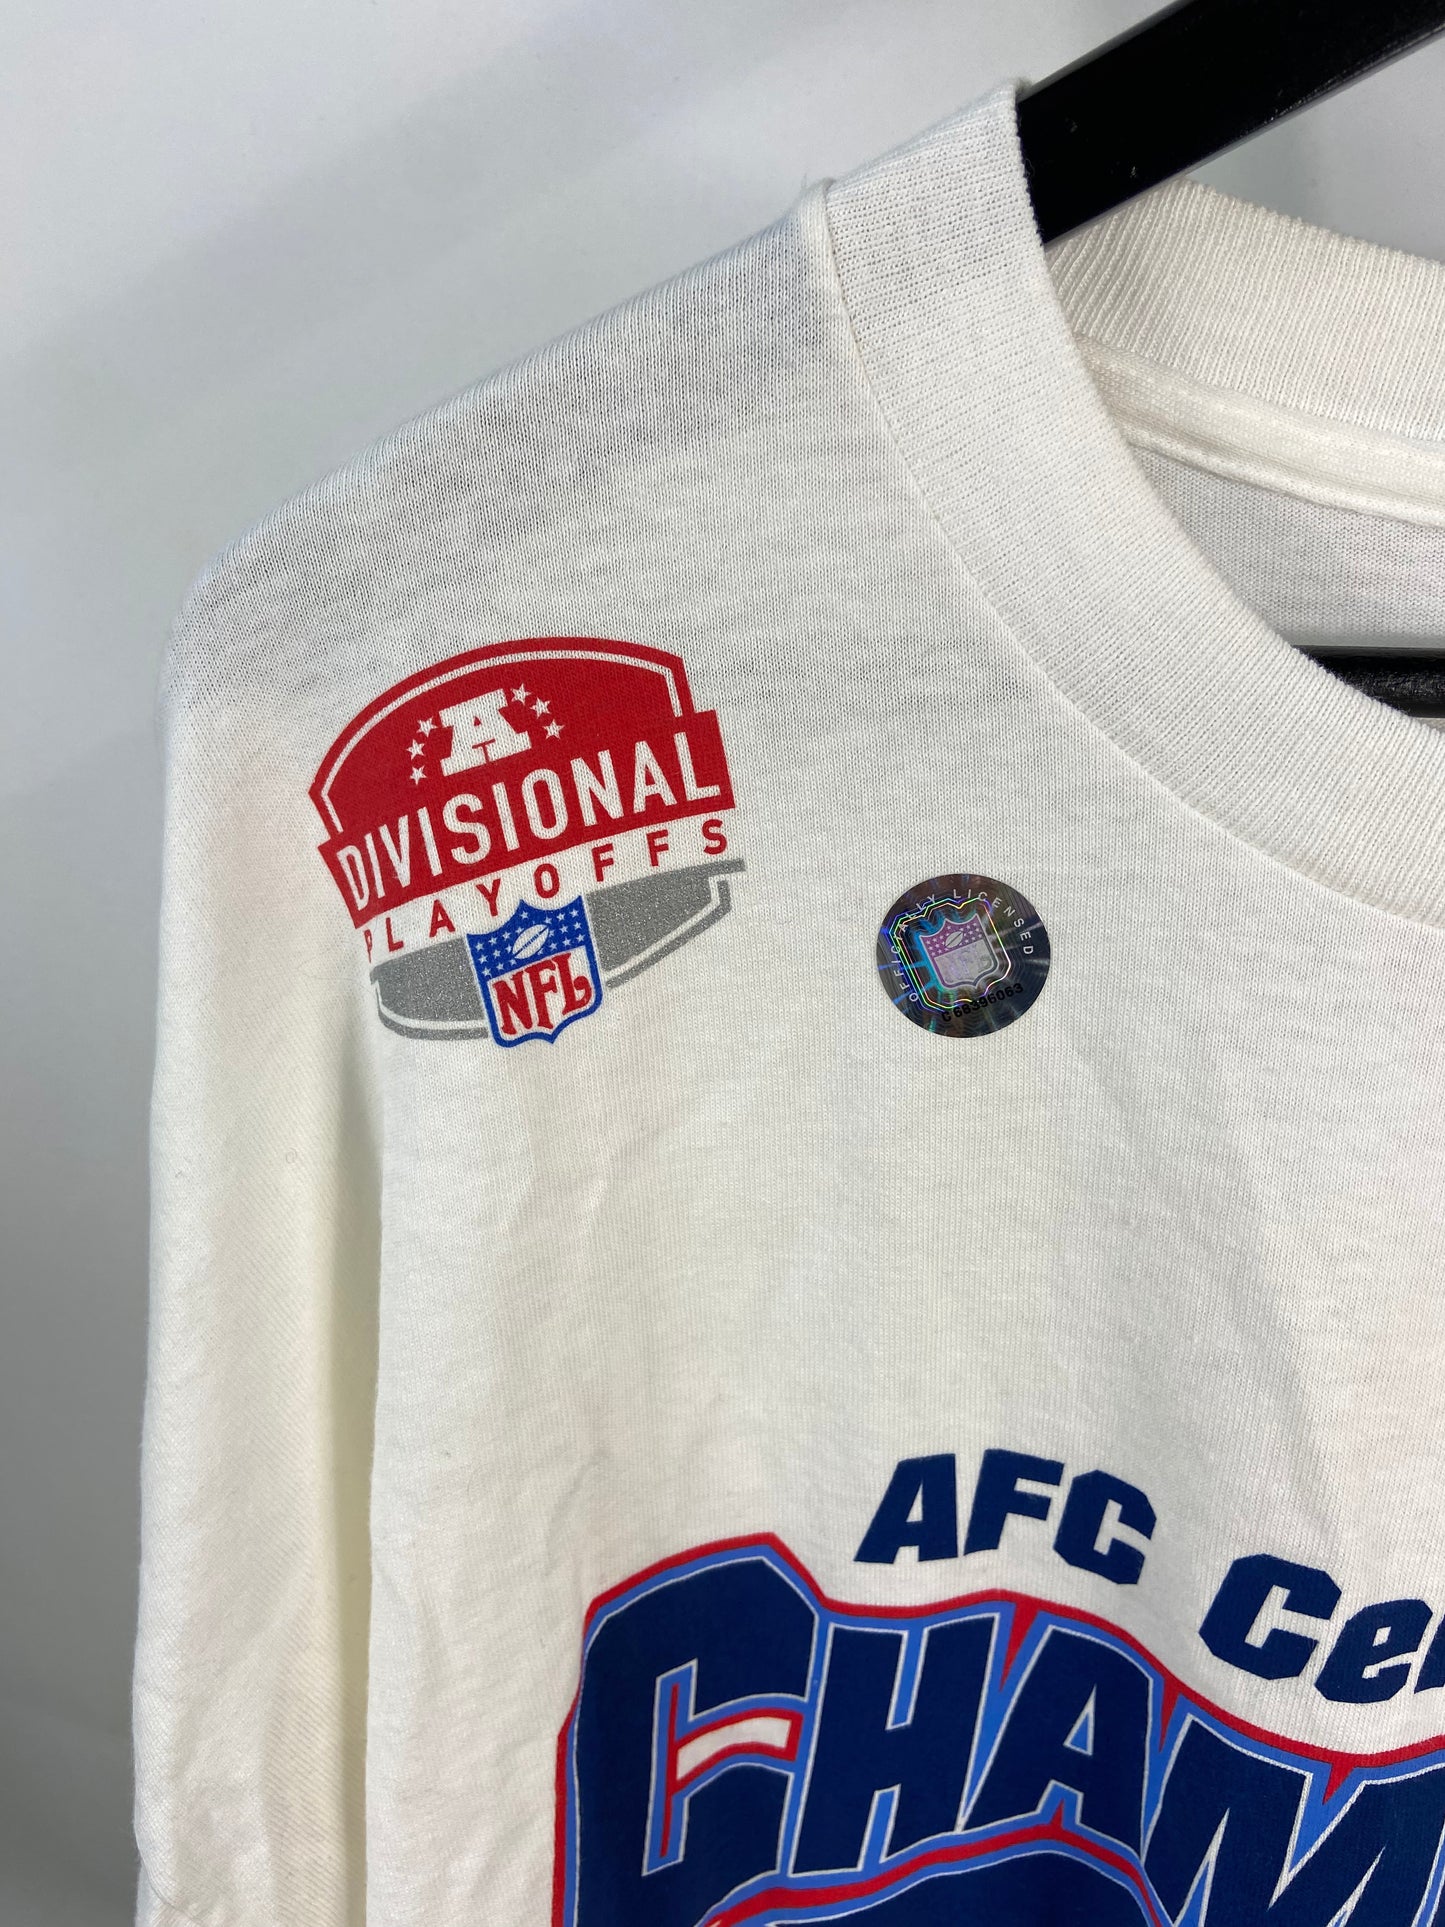 Load image into Gallery viewer, Tennessee Titans AFC Central Champs Show Me Something Tee Sz XXL
